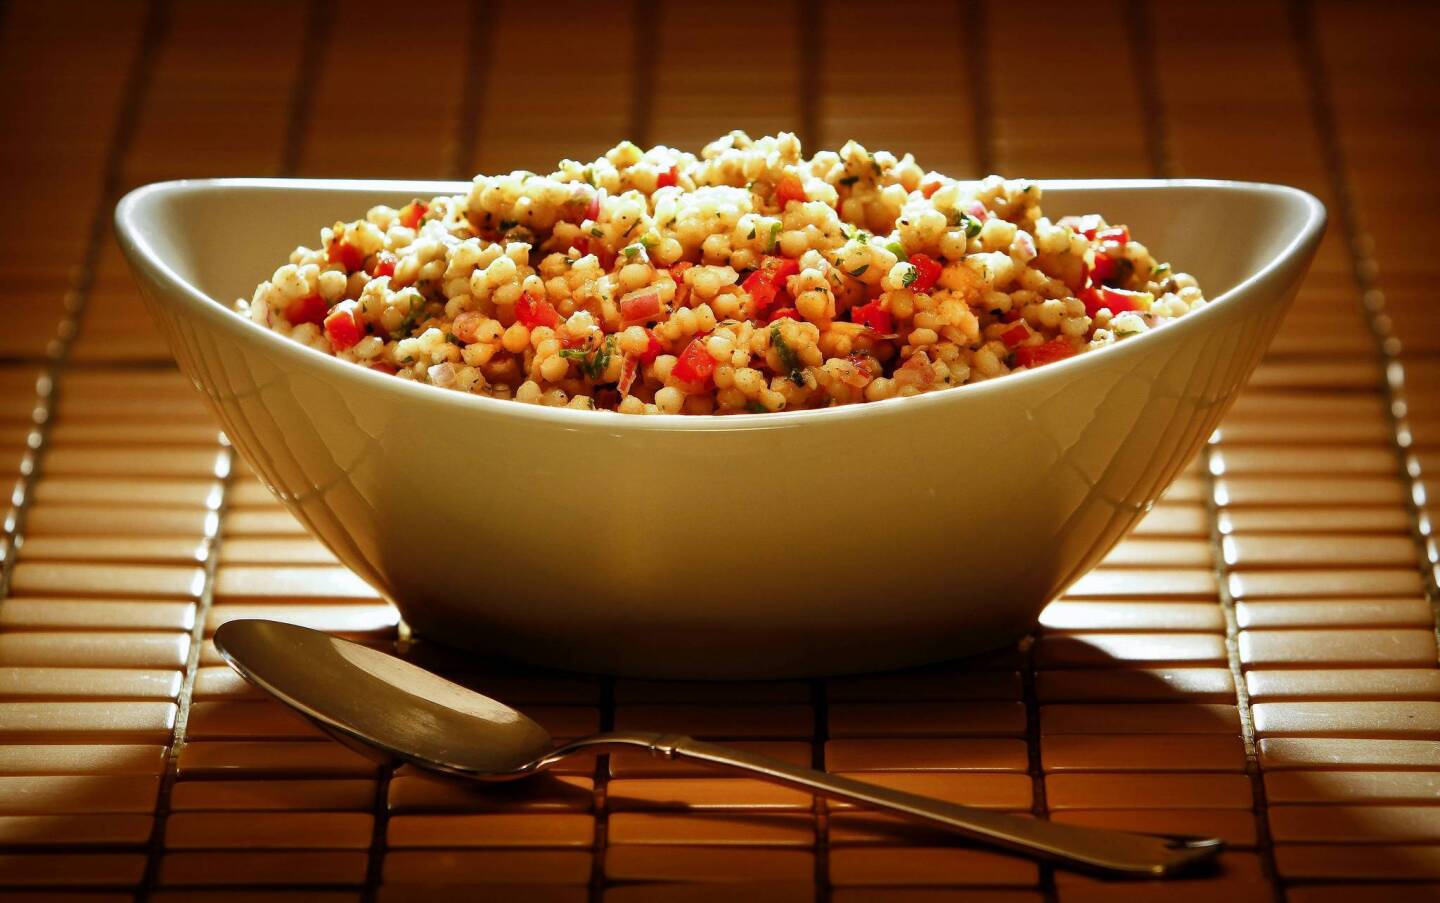 The Israeli couscous is mixed with herbs, lemon and Moroccan spices.